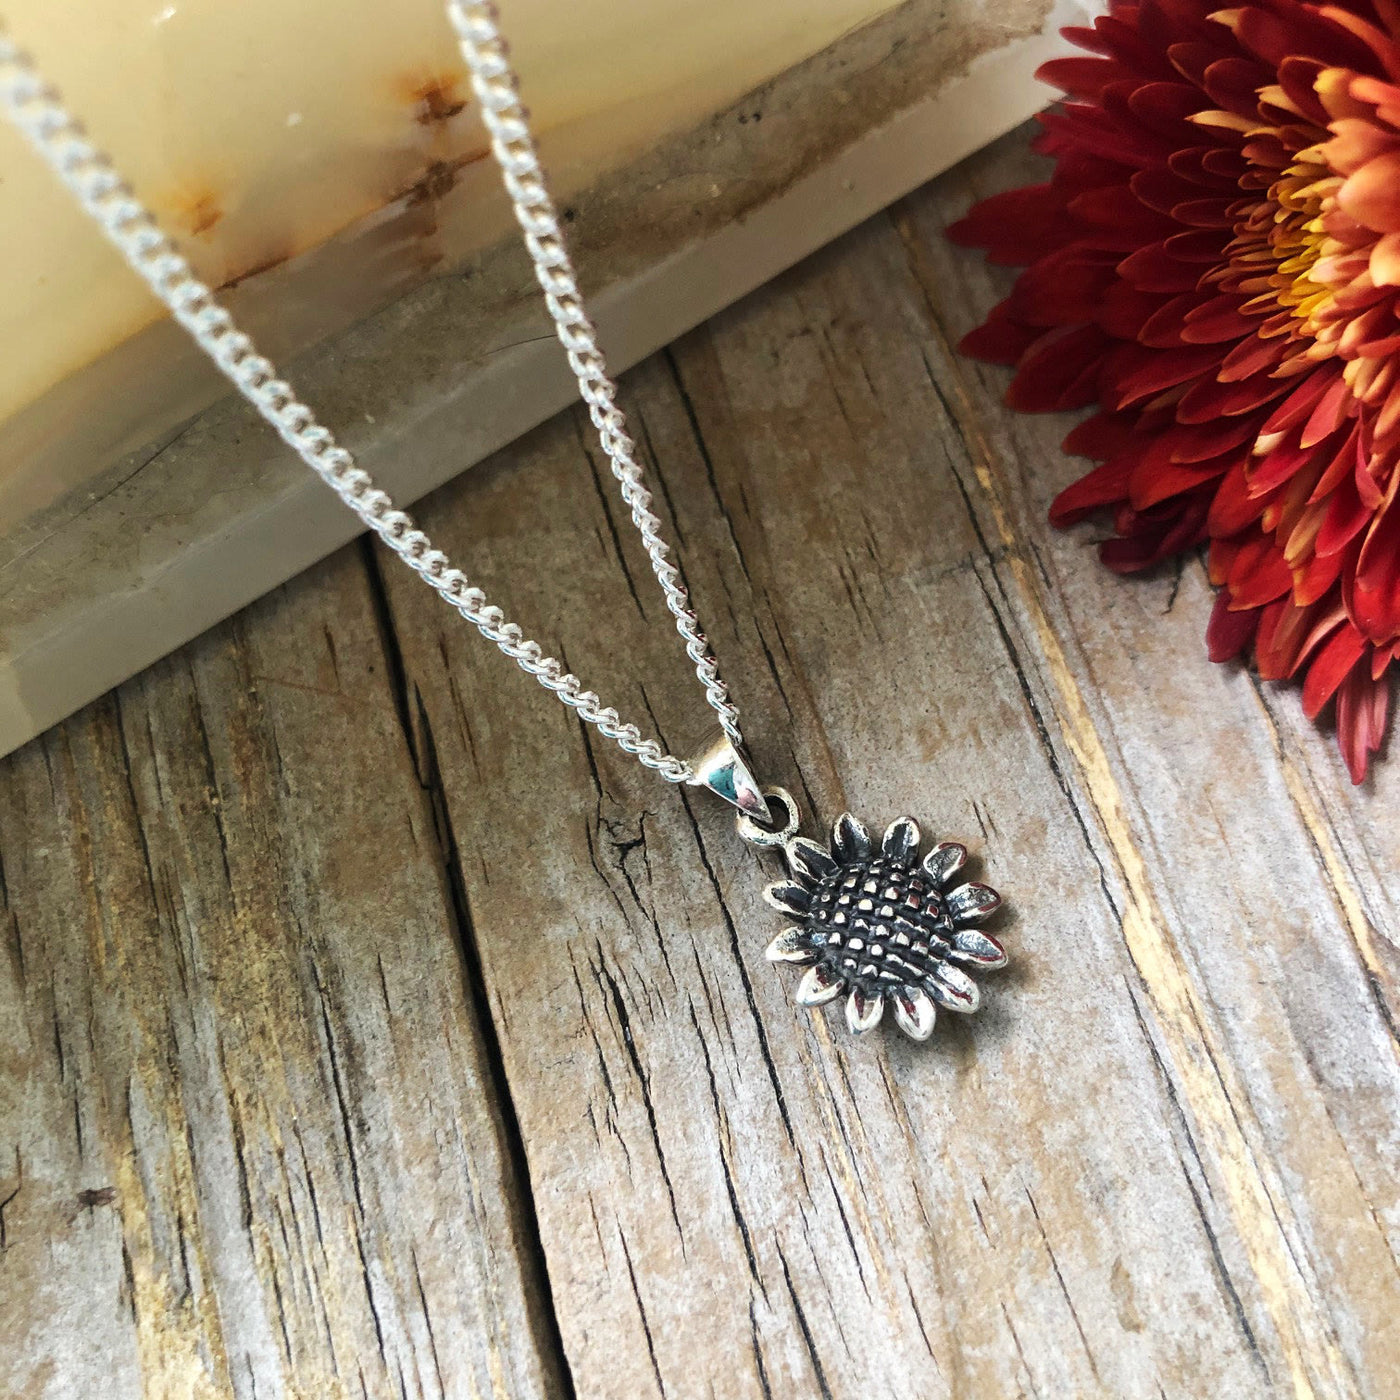 "Positivity & Happiness" Silver Sunflower Necklace